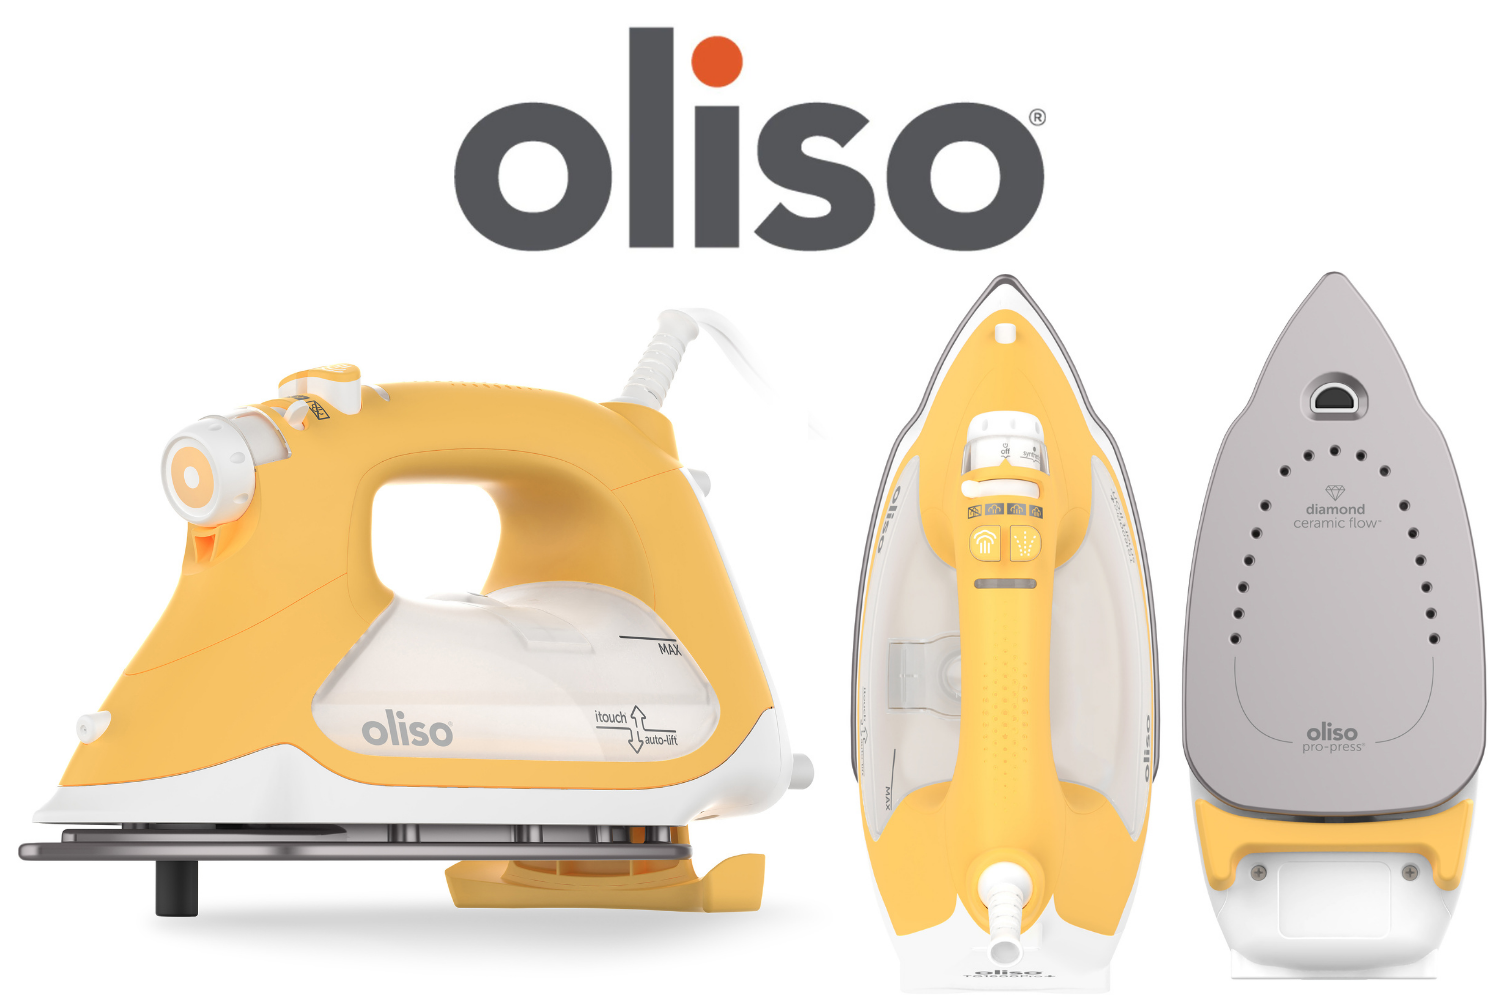 Oliso TG1600 Pro Plus 1800 Watt SmartIron with Auto Lift - for Clothes,  Sewing, Quilting and Crafting Ironing | Diamond Ceramic-Flow Soleplate  Steam